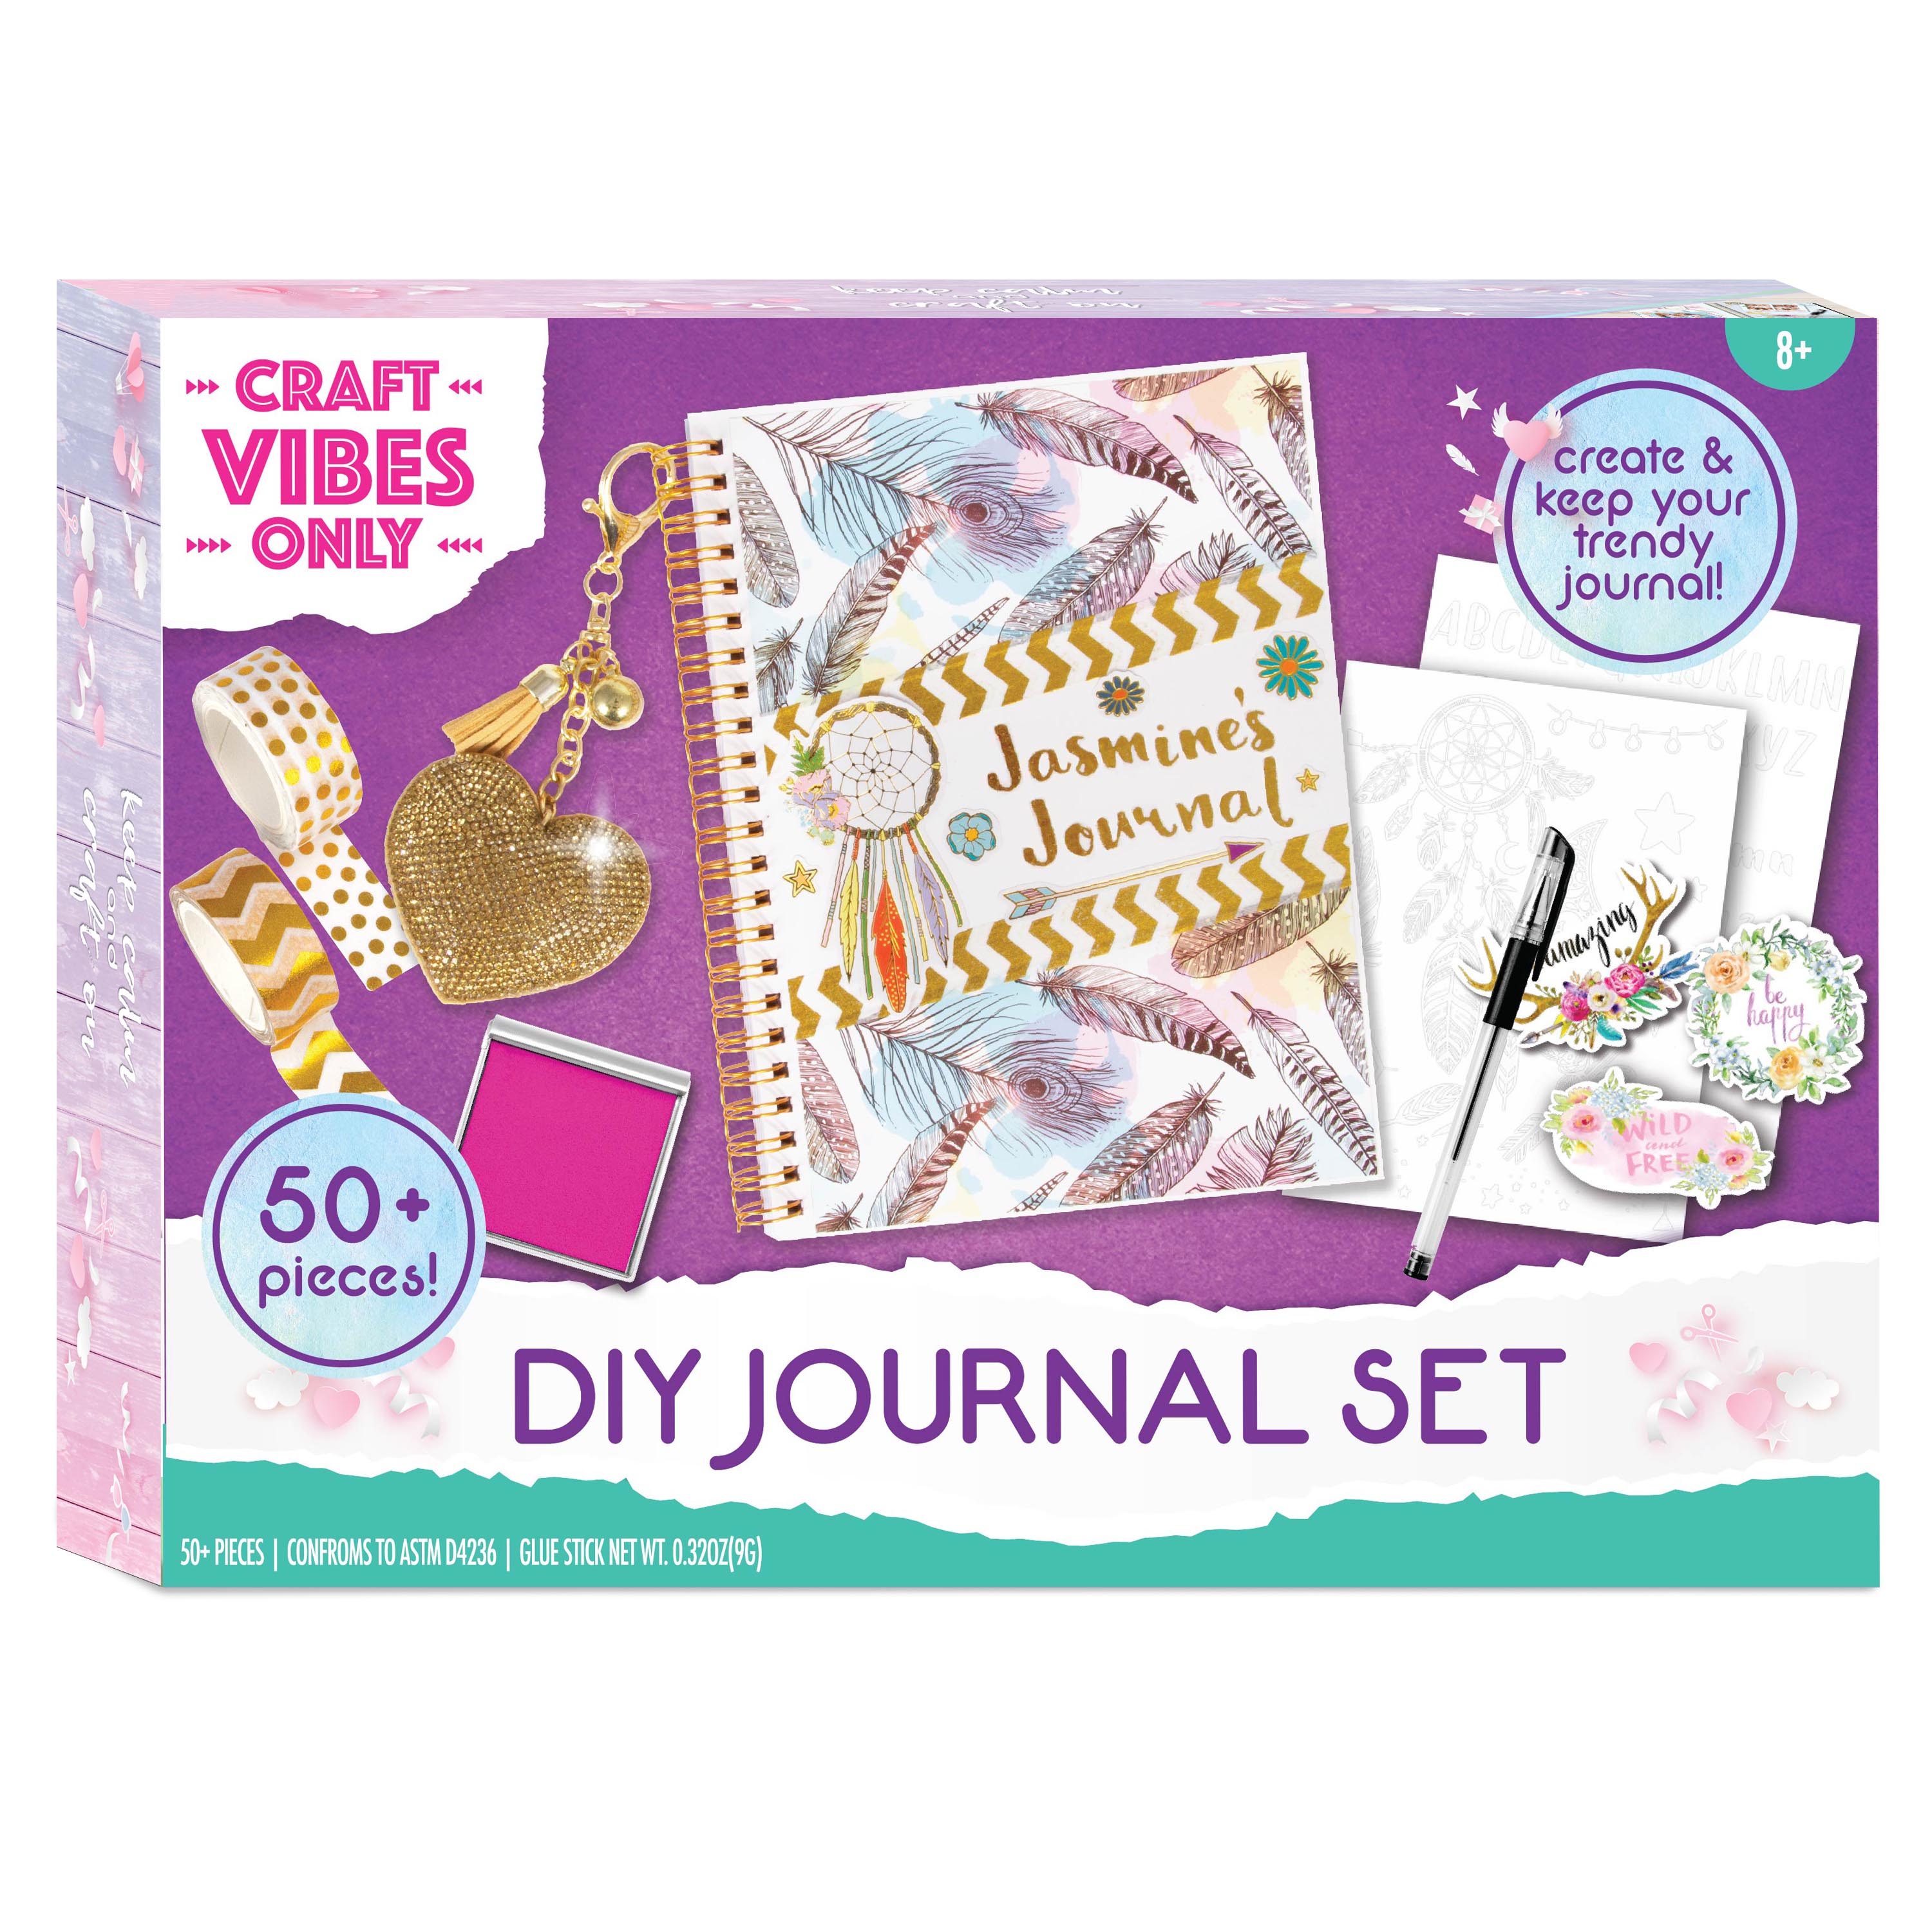 New Supplies to Journal and Craft with! – Welcome!